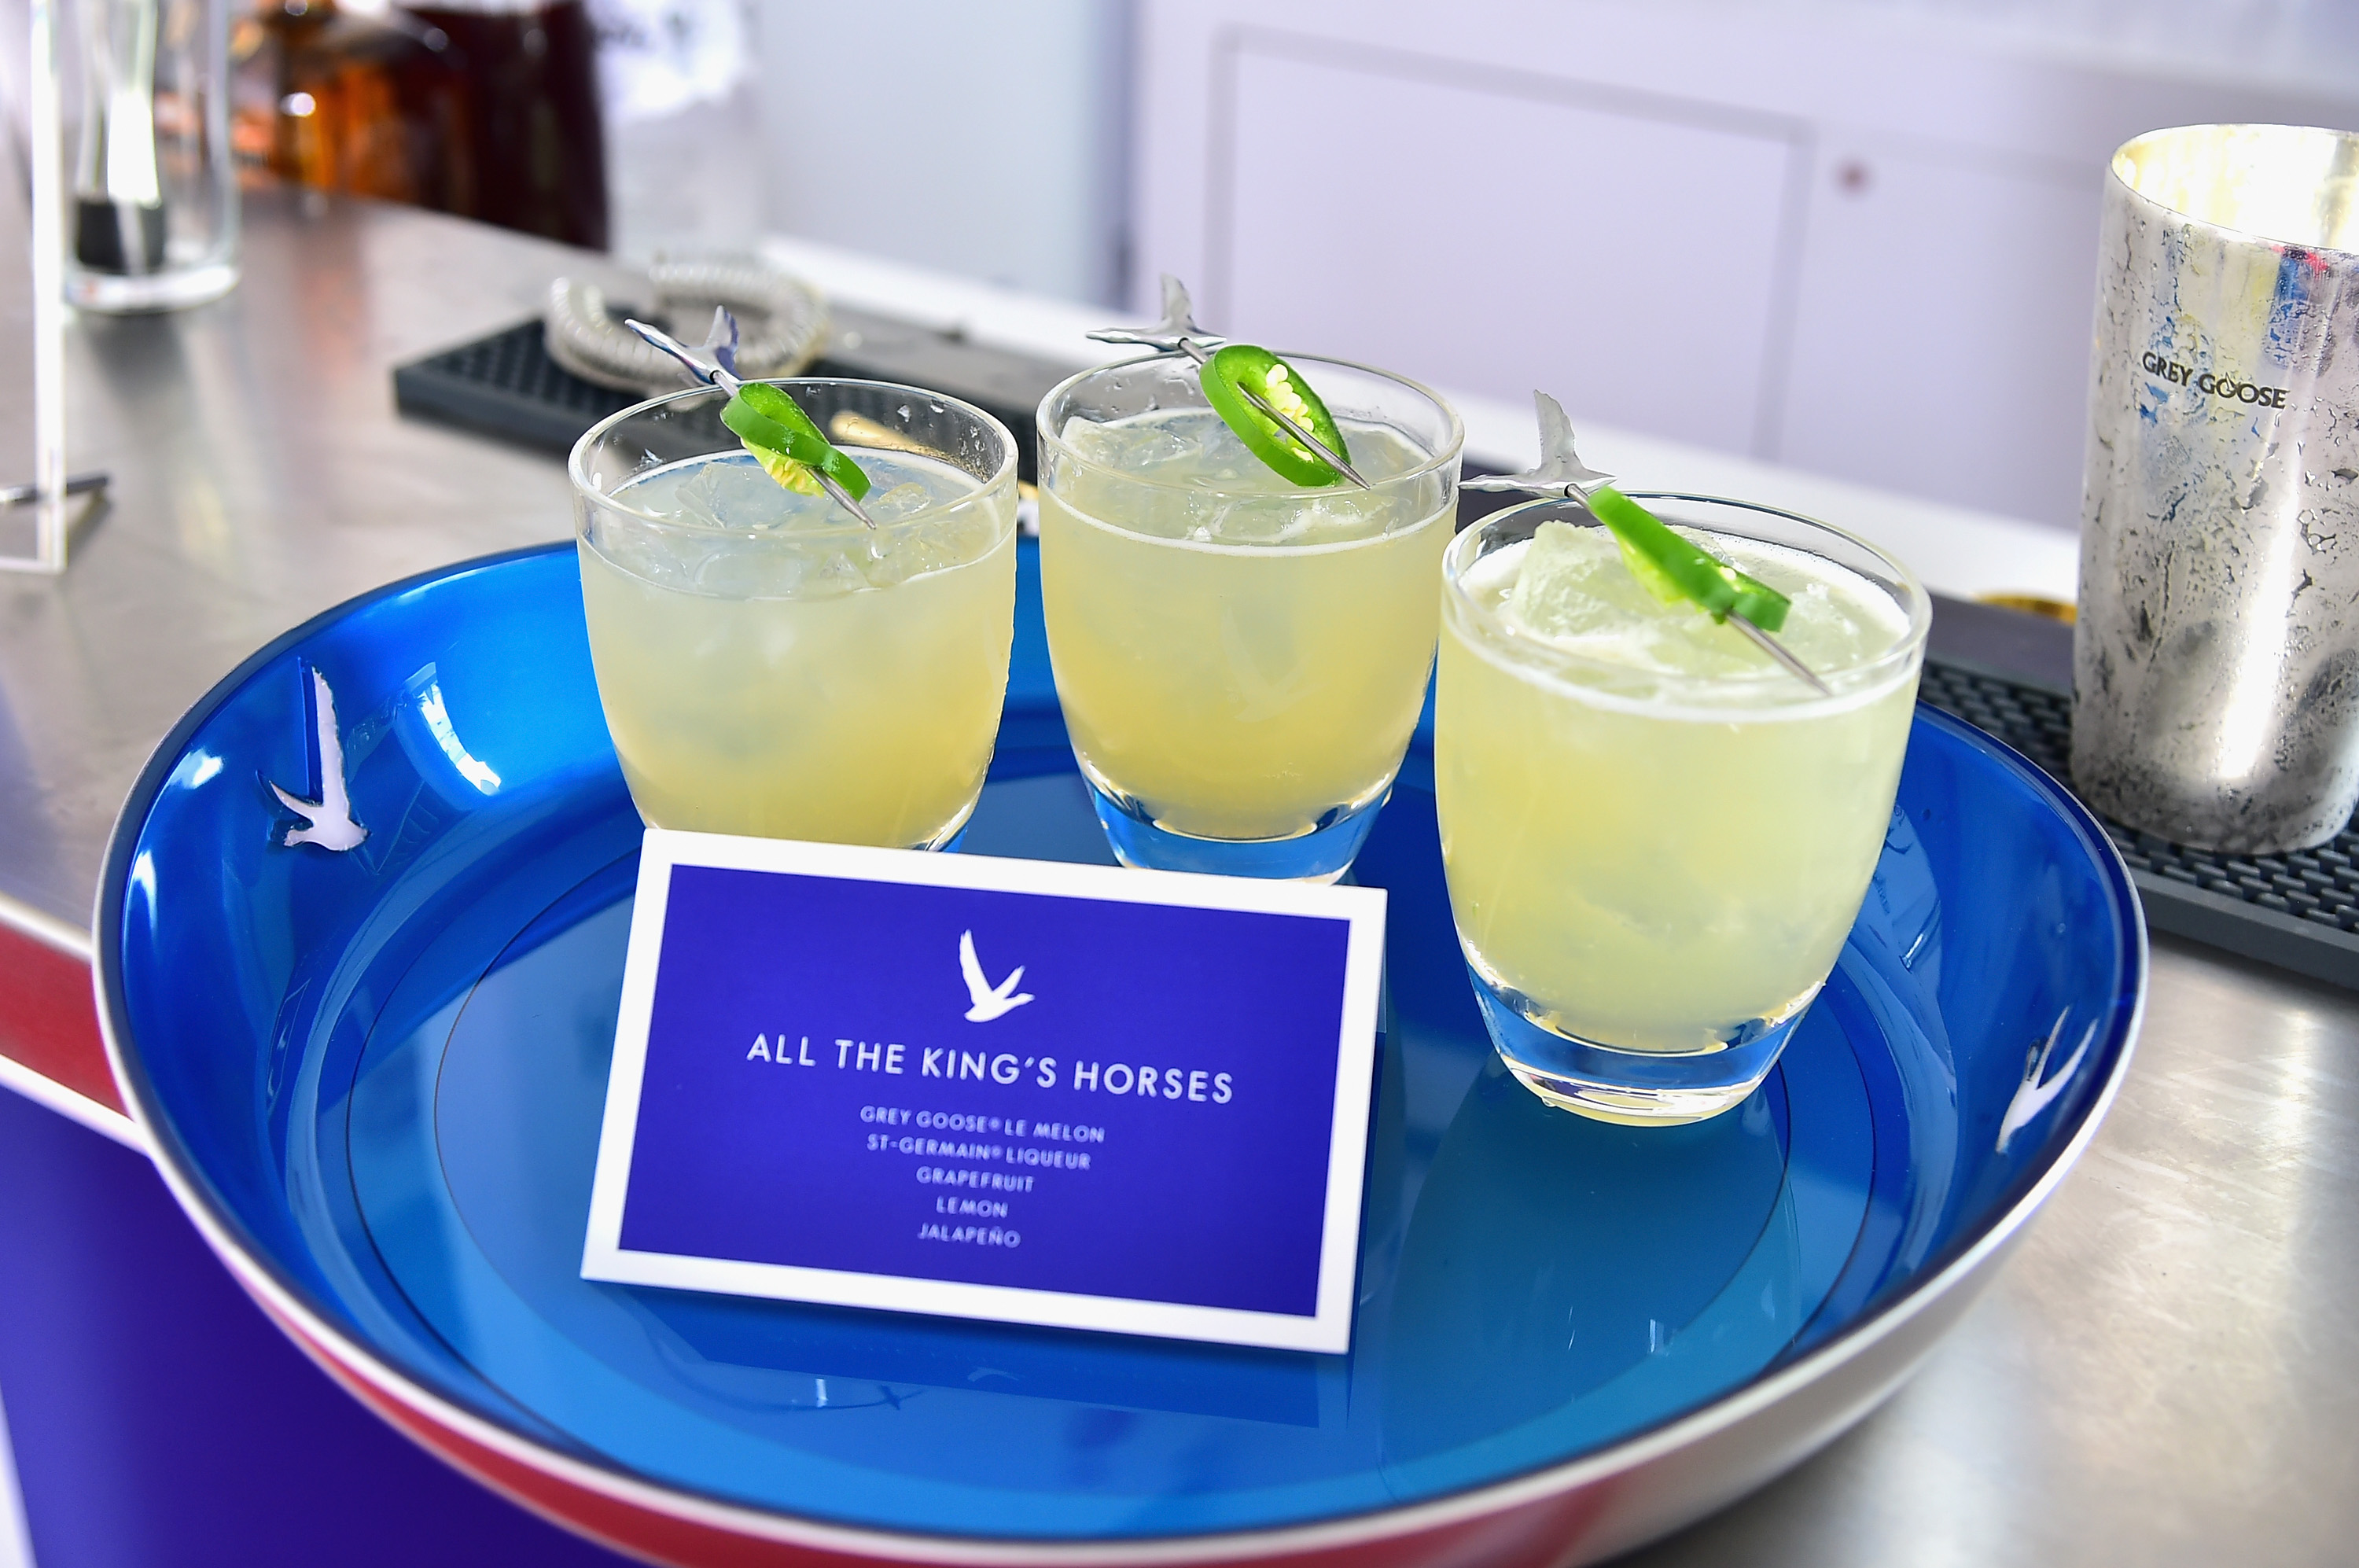 LOUISVILLE, KY - MAY 02:  A view of general atmosphere during the GREY GOOSE Lounge at the 141st running of The Kentucky Derby at Churchill Downs on May 2, 2015 in Louisville, Kentucky.  (Photo by Theo Wargo/Getty Images for Grey Goose)